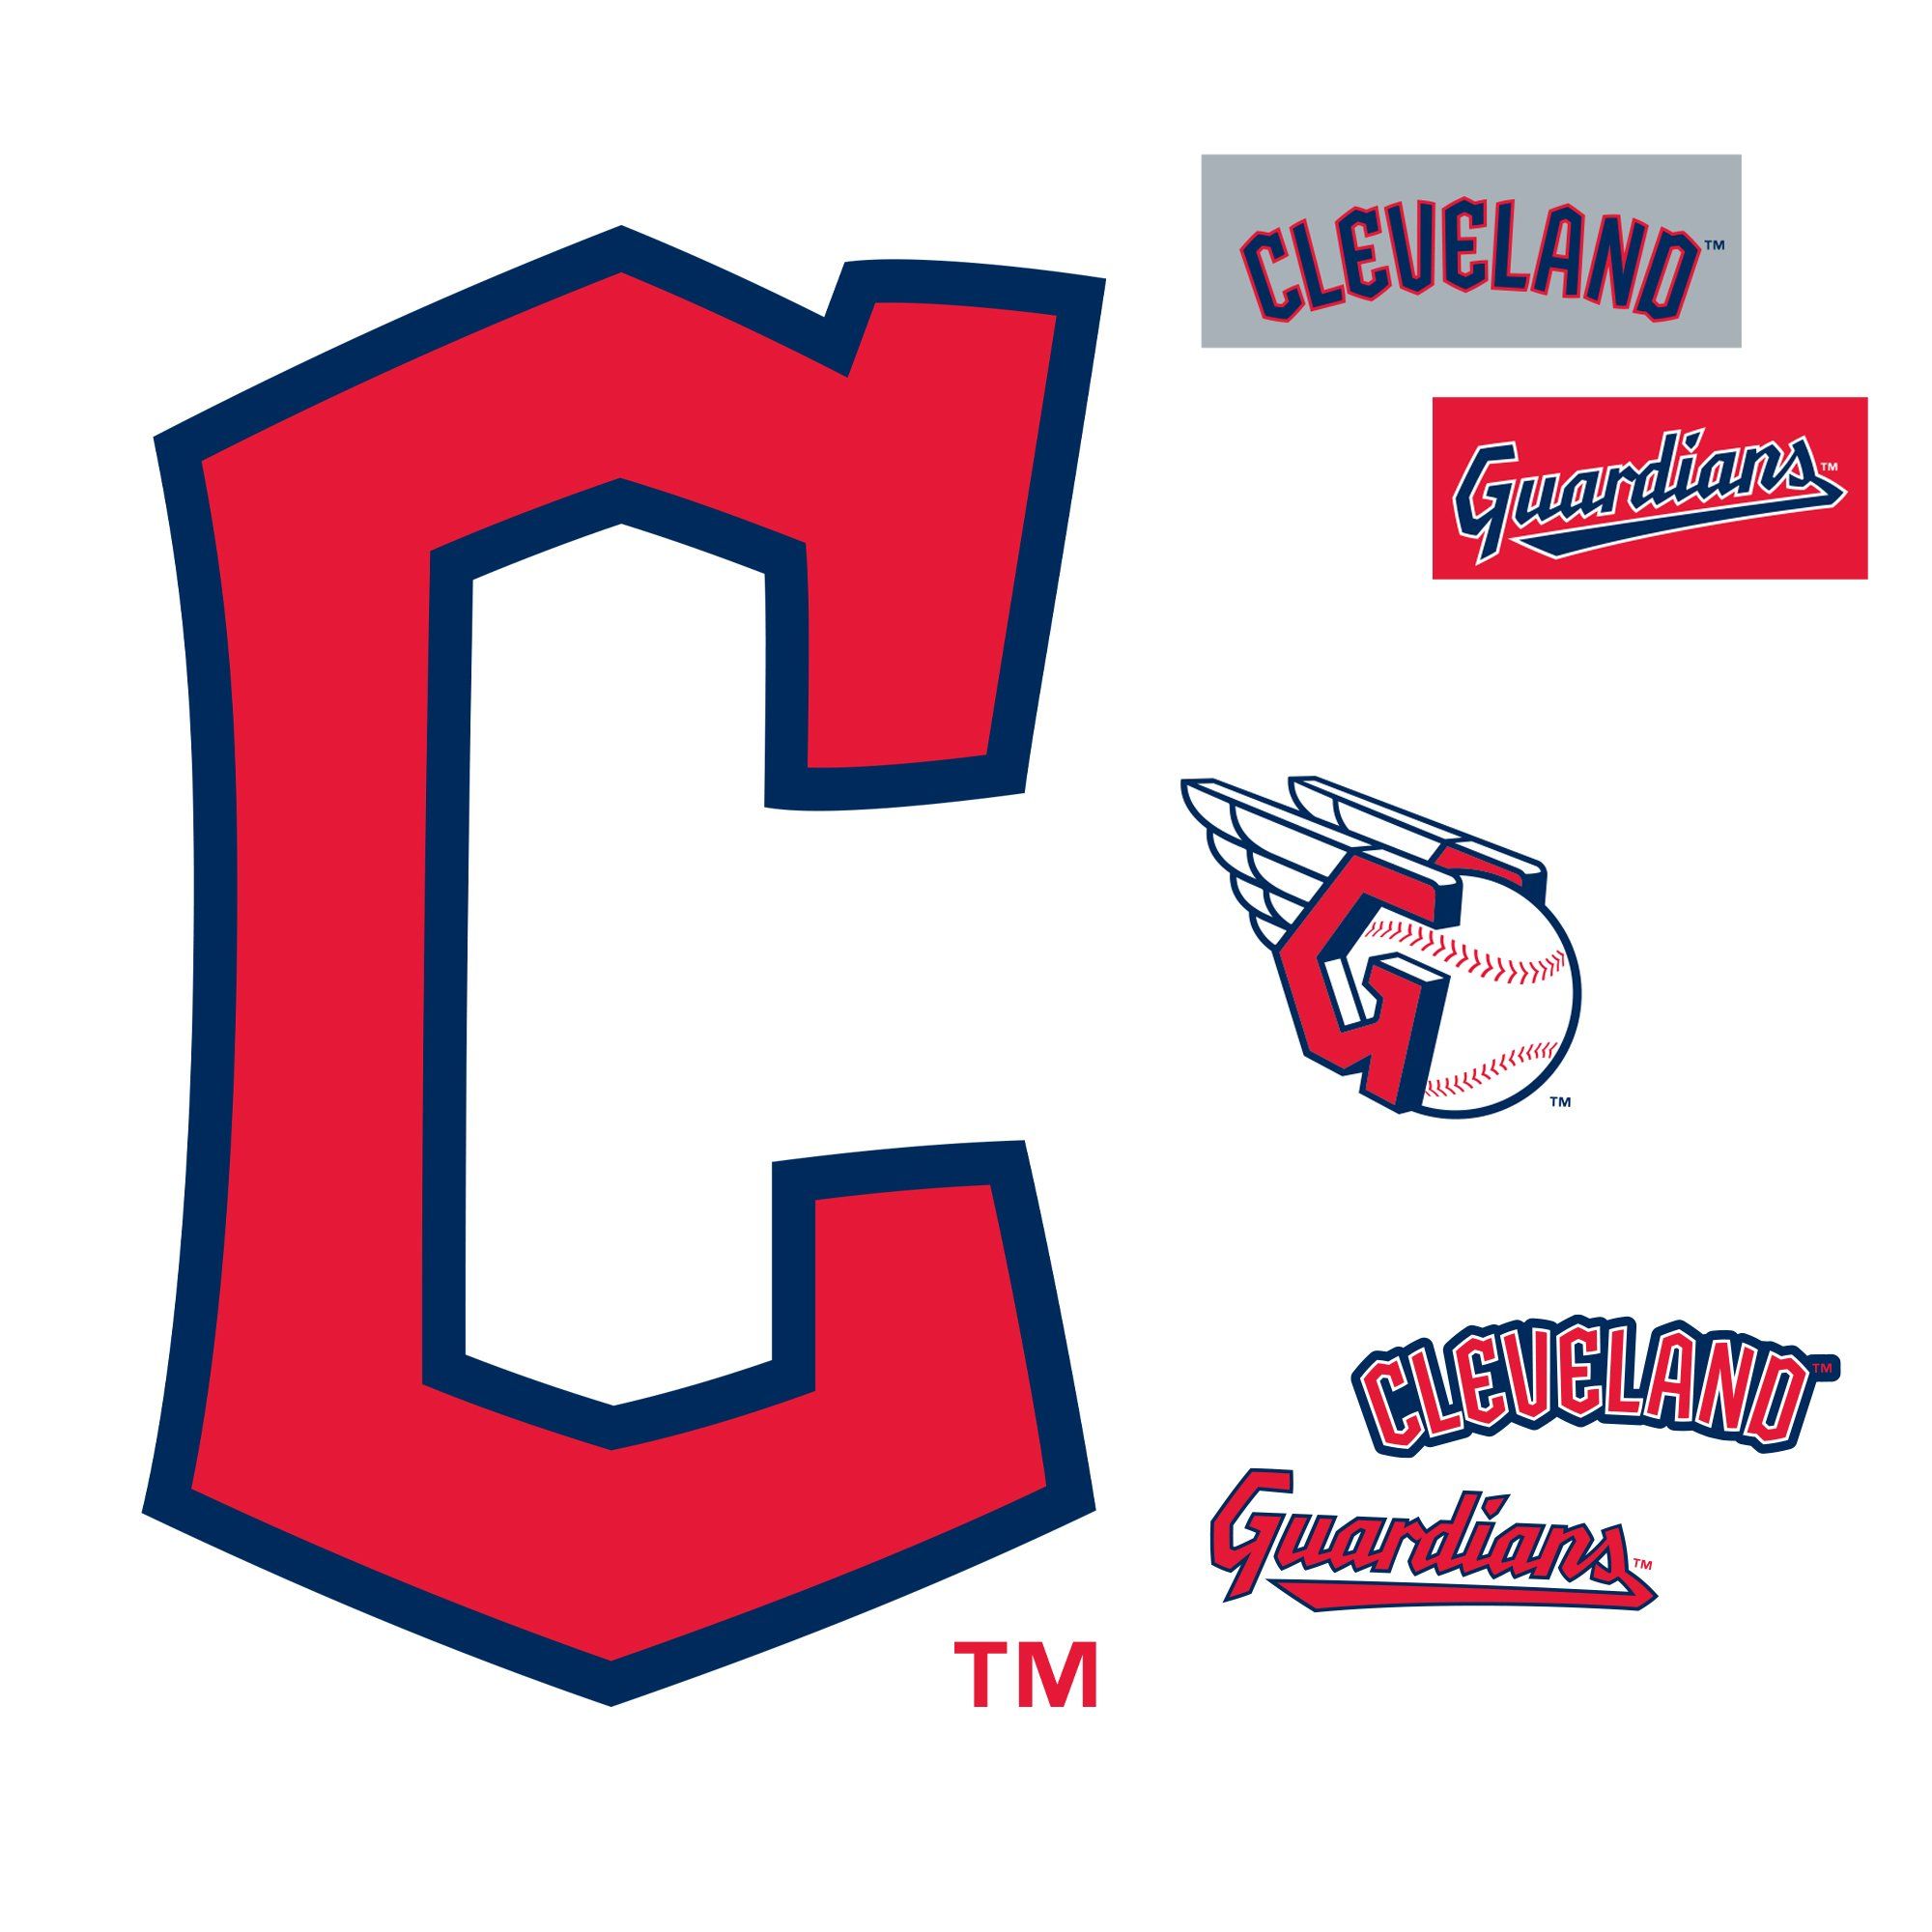 Cleveland Guardians: C Logo Licensed MLB Removable Adhesive Decal. Vinyl wall decals, Wall graphics, Fathead decals